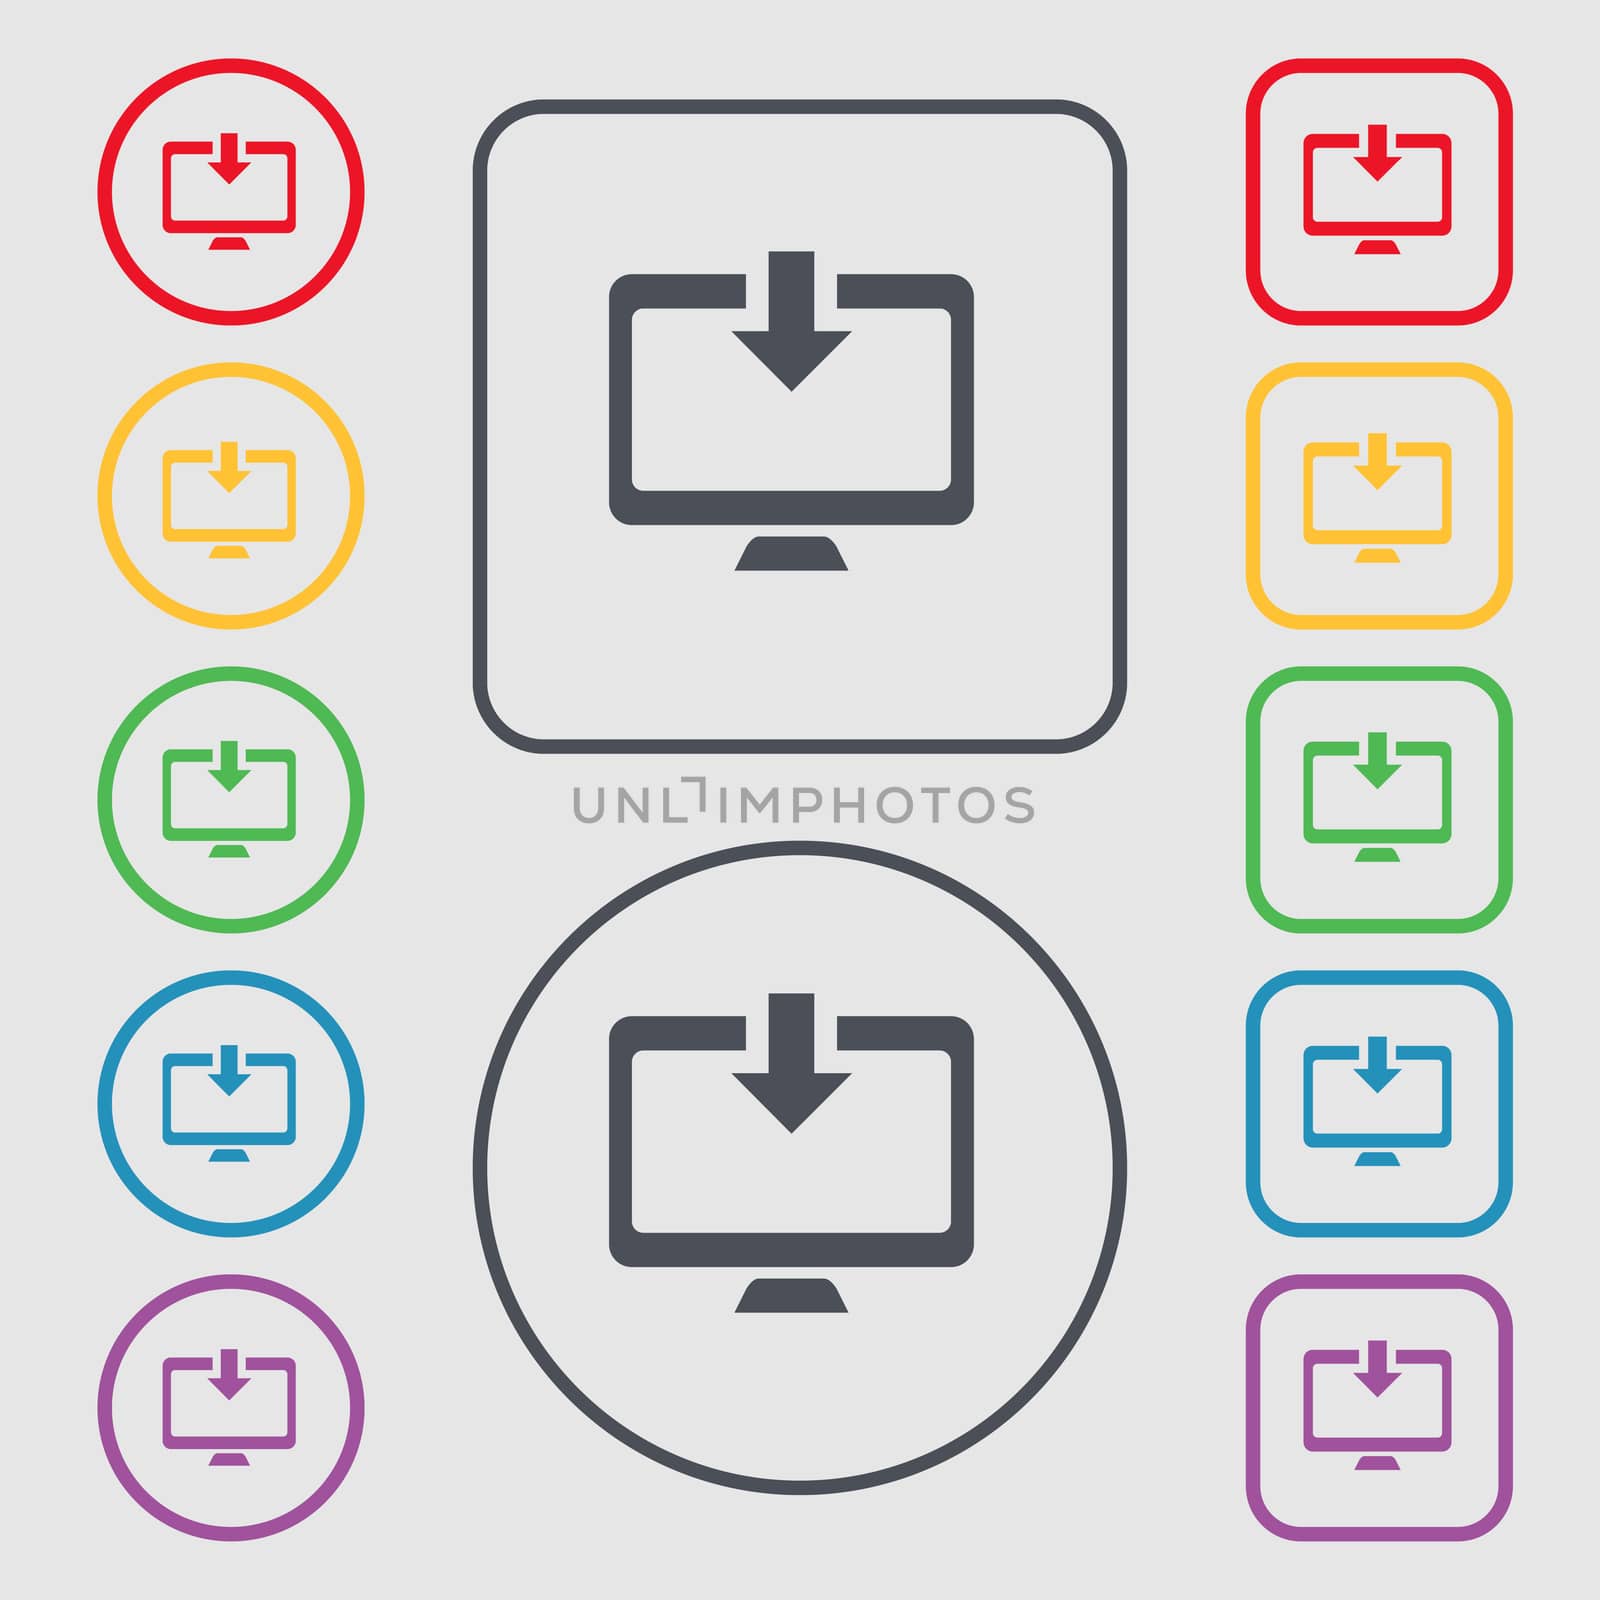 Download, Load, Backup icon sign. symbol on the Round and square buttons with frame. illustration